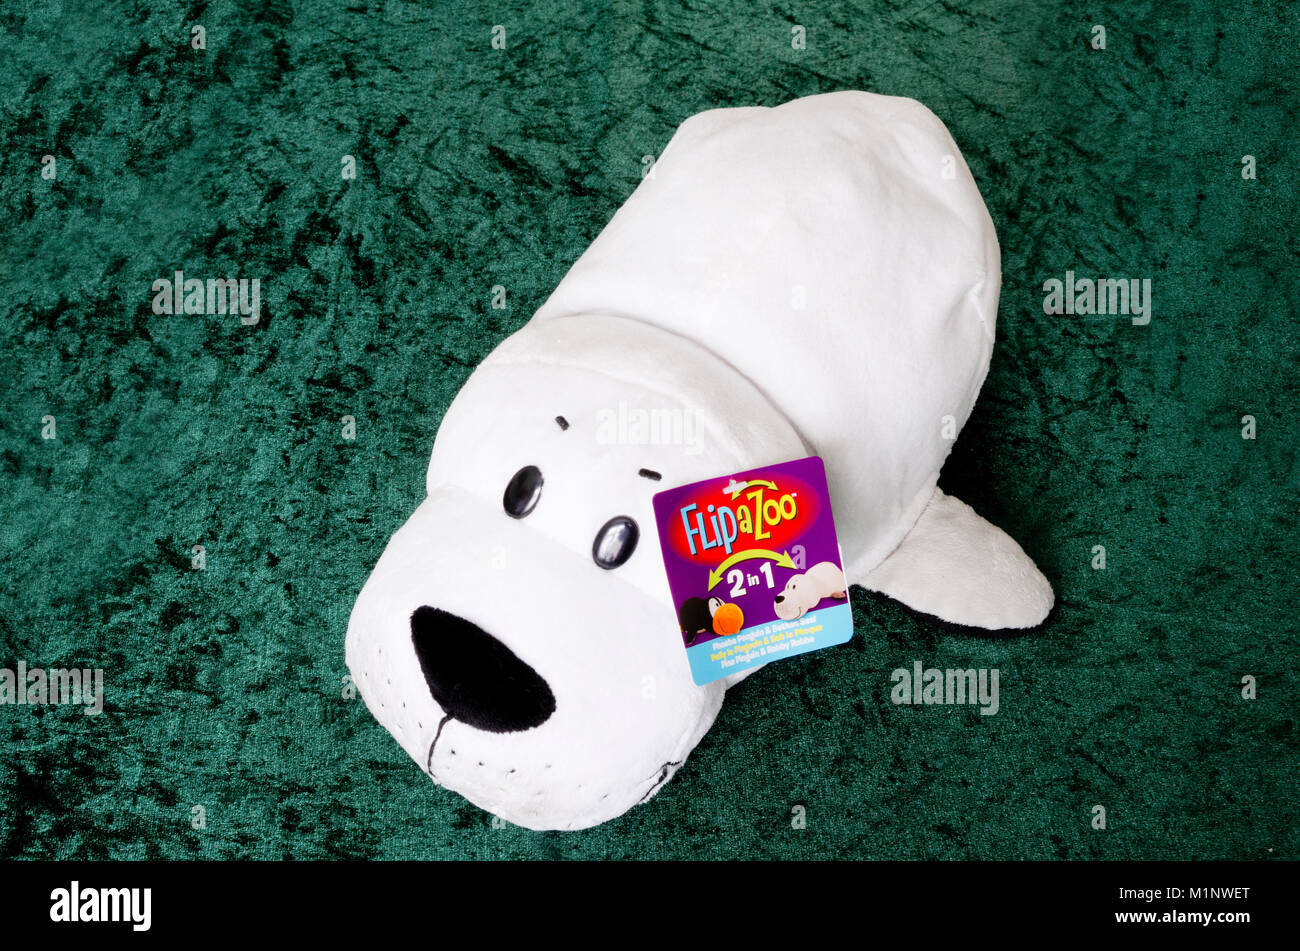 FlipaZoo Cuddly Soft Toy Banque D'Images